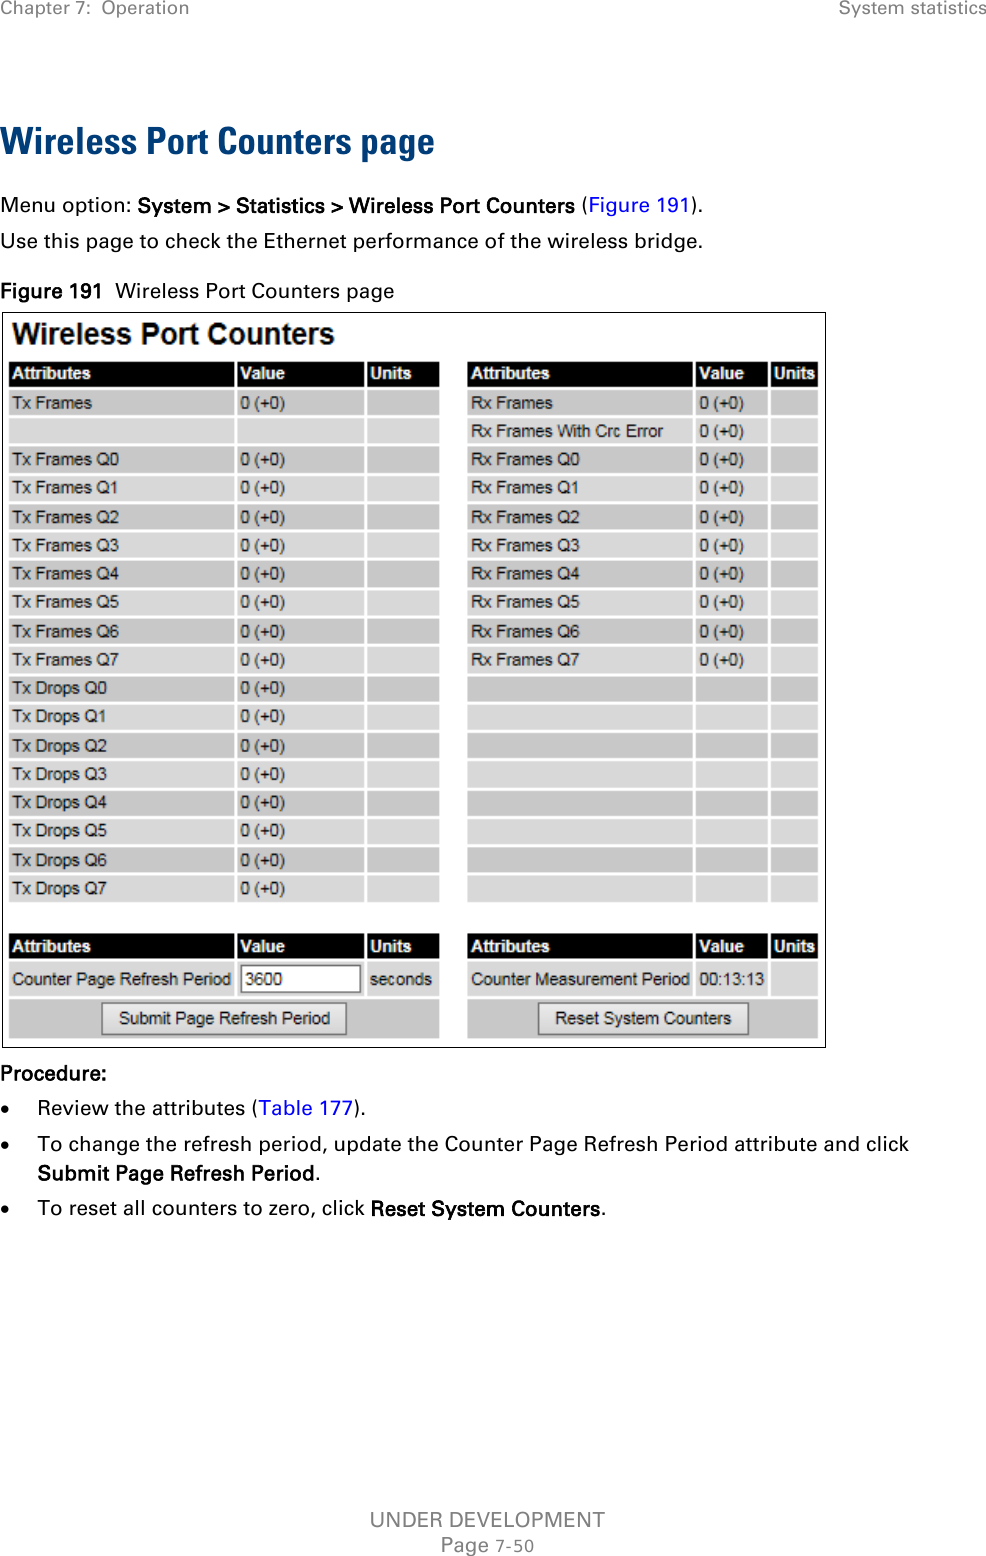 Chapter 7:  Operation System statistics  Wireless Port Counters page Menu option: System &gt; Statistics &gt; Wireless Port Counters (Figure 191). Use this page to check the Ethernet performance of the wireless bridge. Figure 191  Wireless Port Counters page  Procedure: • Review the attributes (Table 177). • To change the refresh period, update the Counter Page Refresh Period attribute and click Submit Page Refresh Period. • To reset all counters to zero, click Reset System Counters.    UNDER DEVELOPMENT Page 7-50 